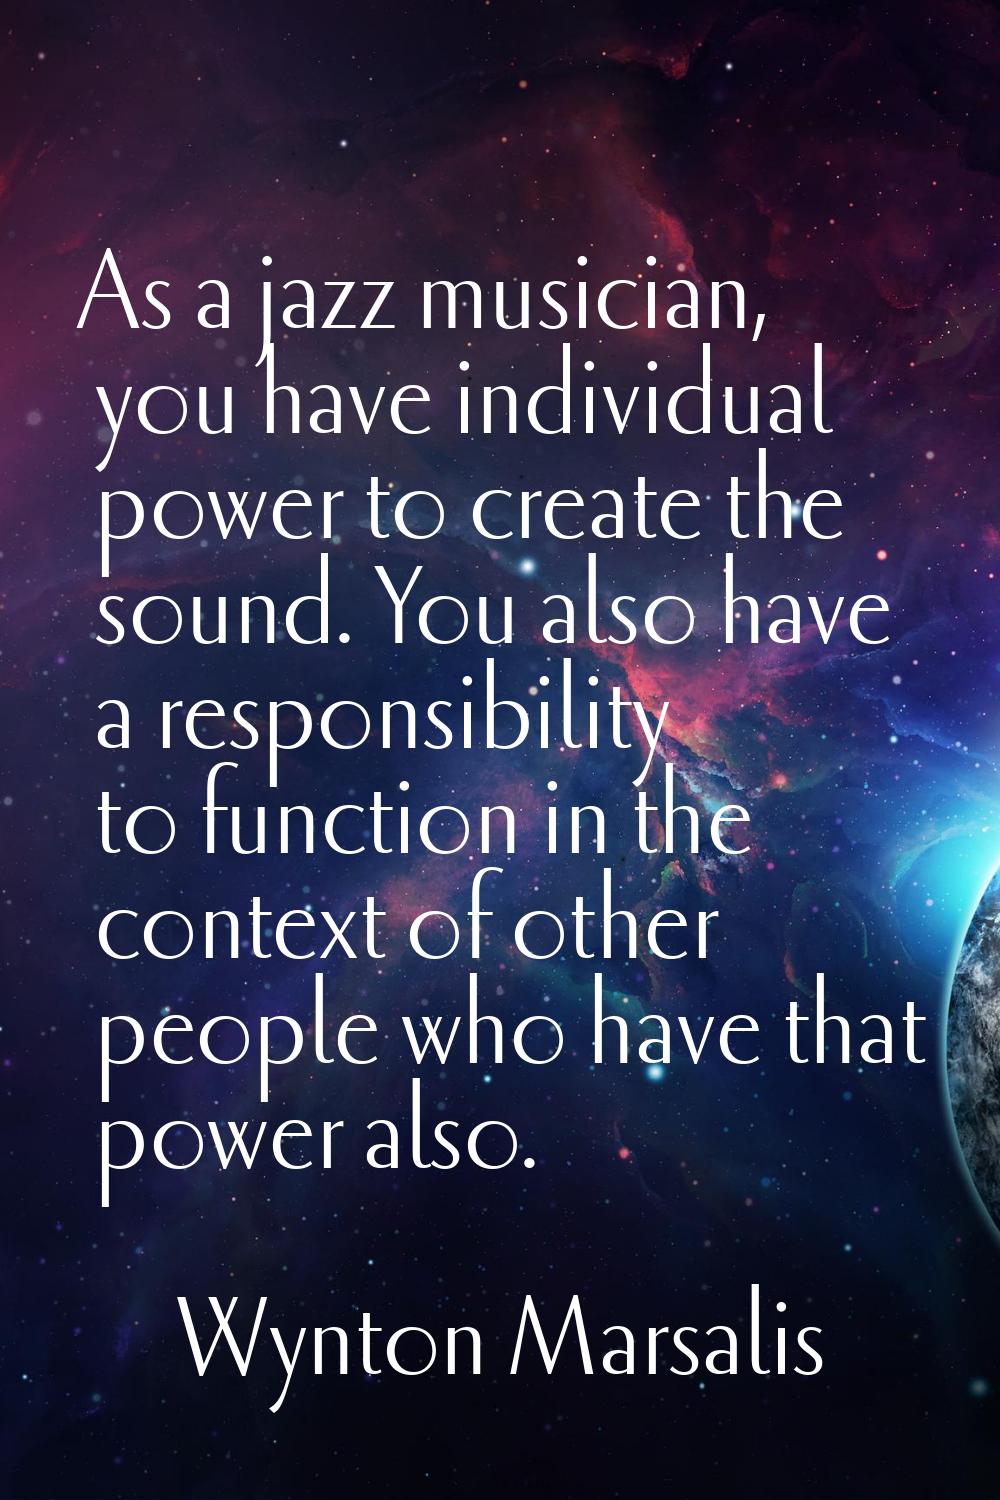 As a jazz musician, you have individual power to create the sound. You also have a responsibility t